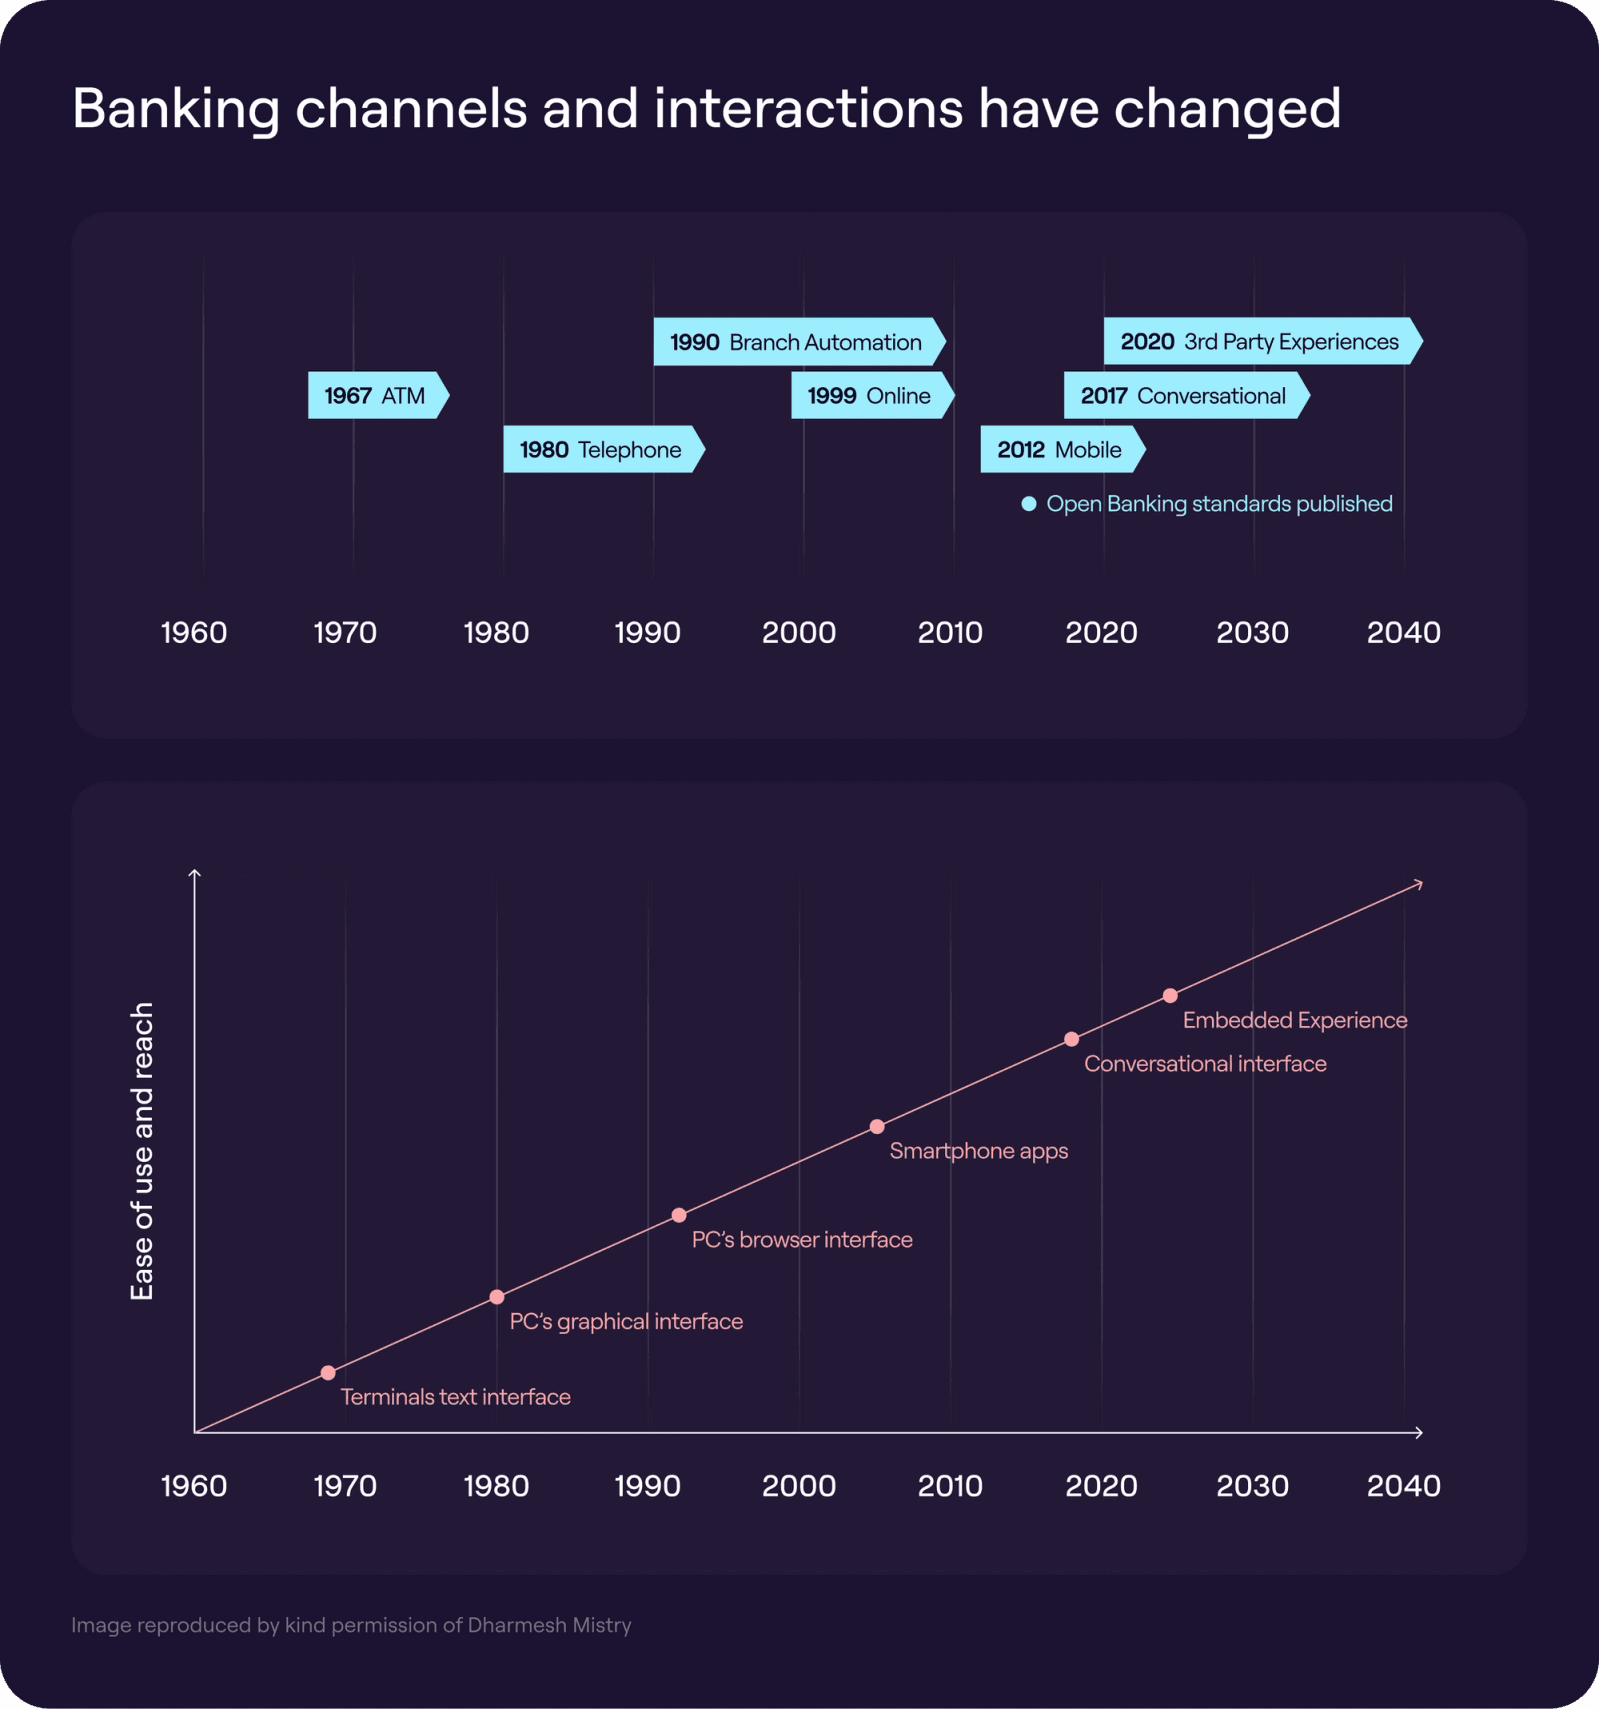 Banking channels and interactions have changed